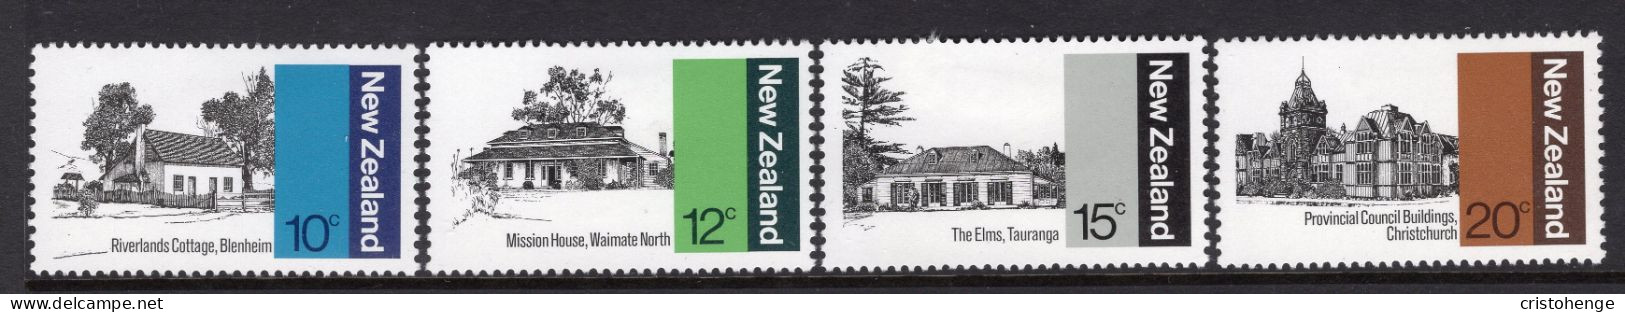 New Zealand 1979 Architecture - 1st Issue - Set HM (SG 1188-1191) - Neufs